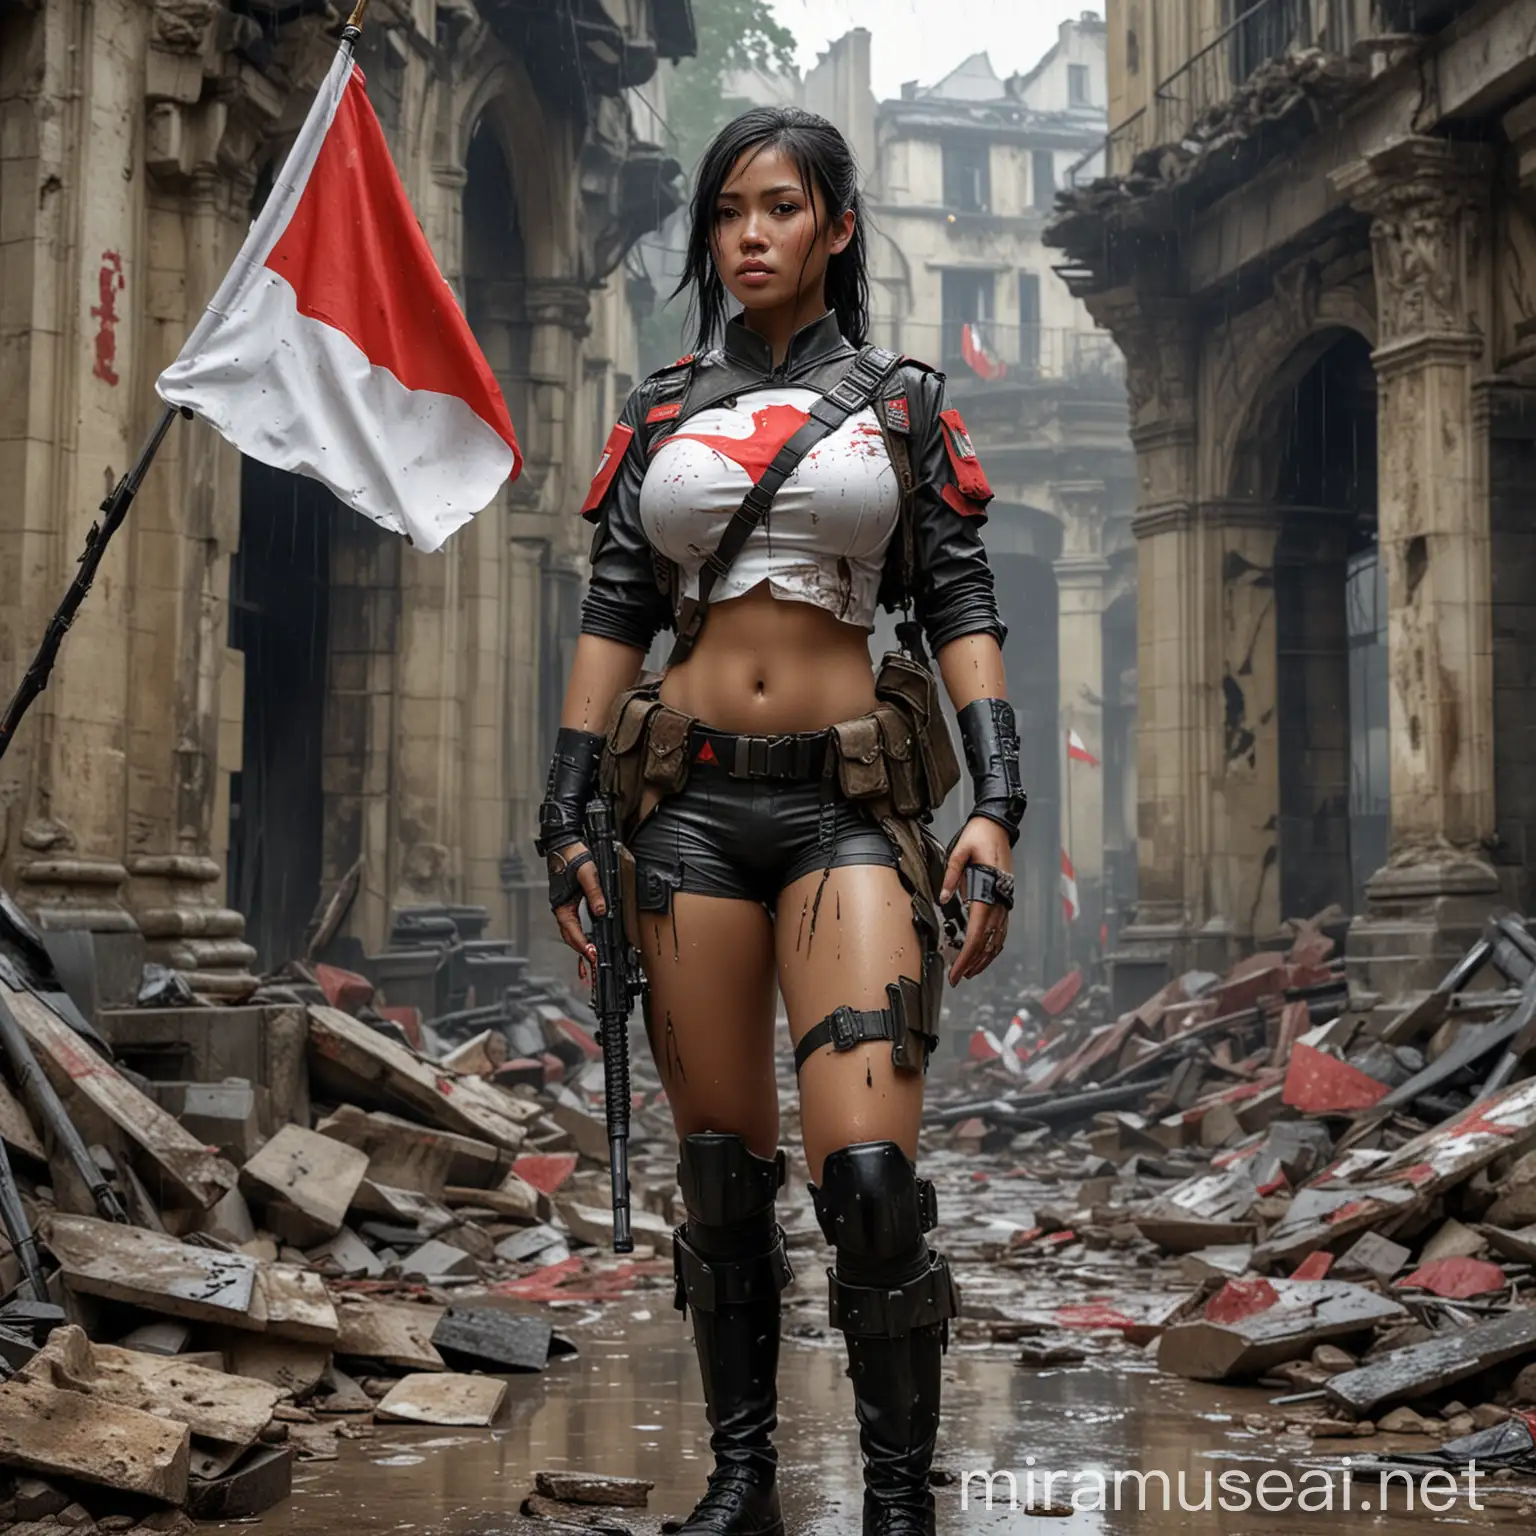 Indonesian Girl in Combat Uniform amidst Parisian Ruins with Flag